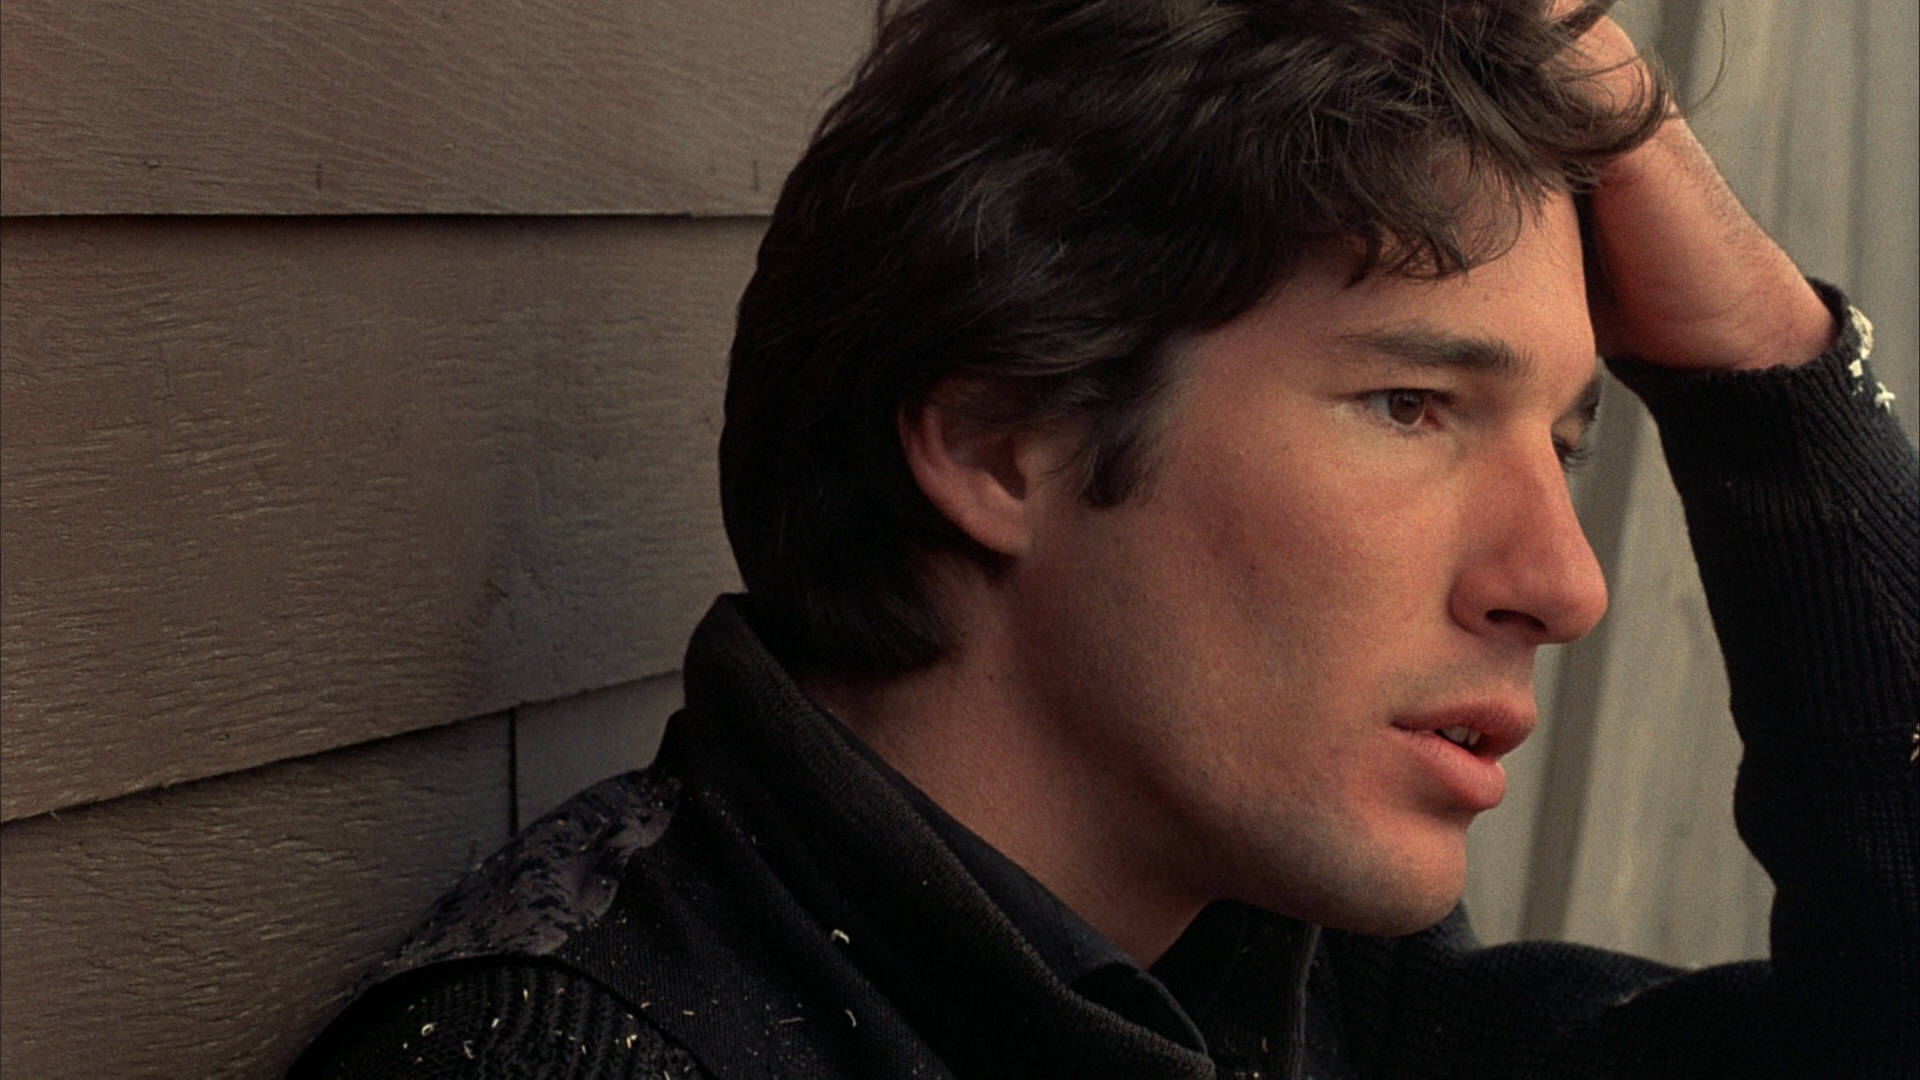 Richard Gere Days Of Heaven Background